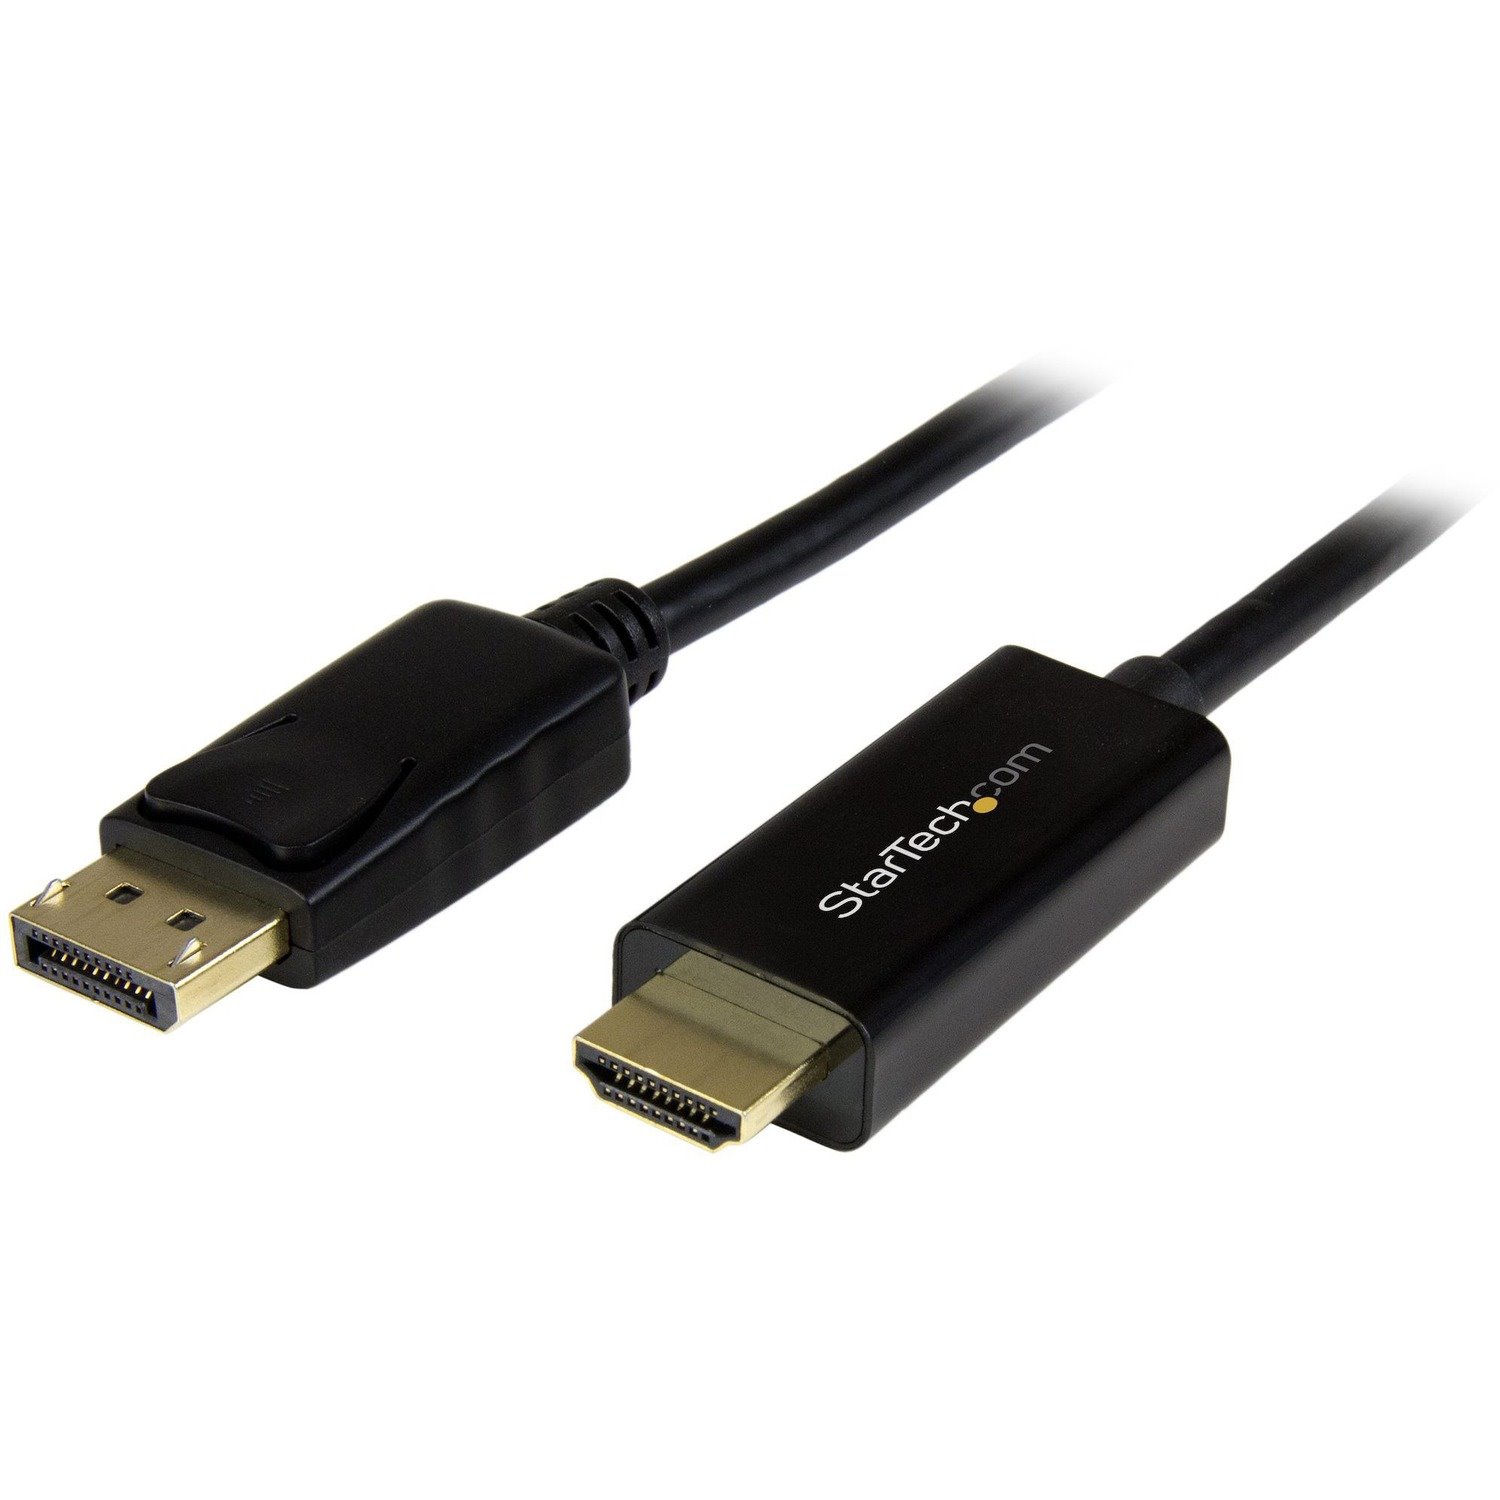 2 m DisplayPort to HDMI A/V Cable